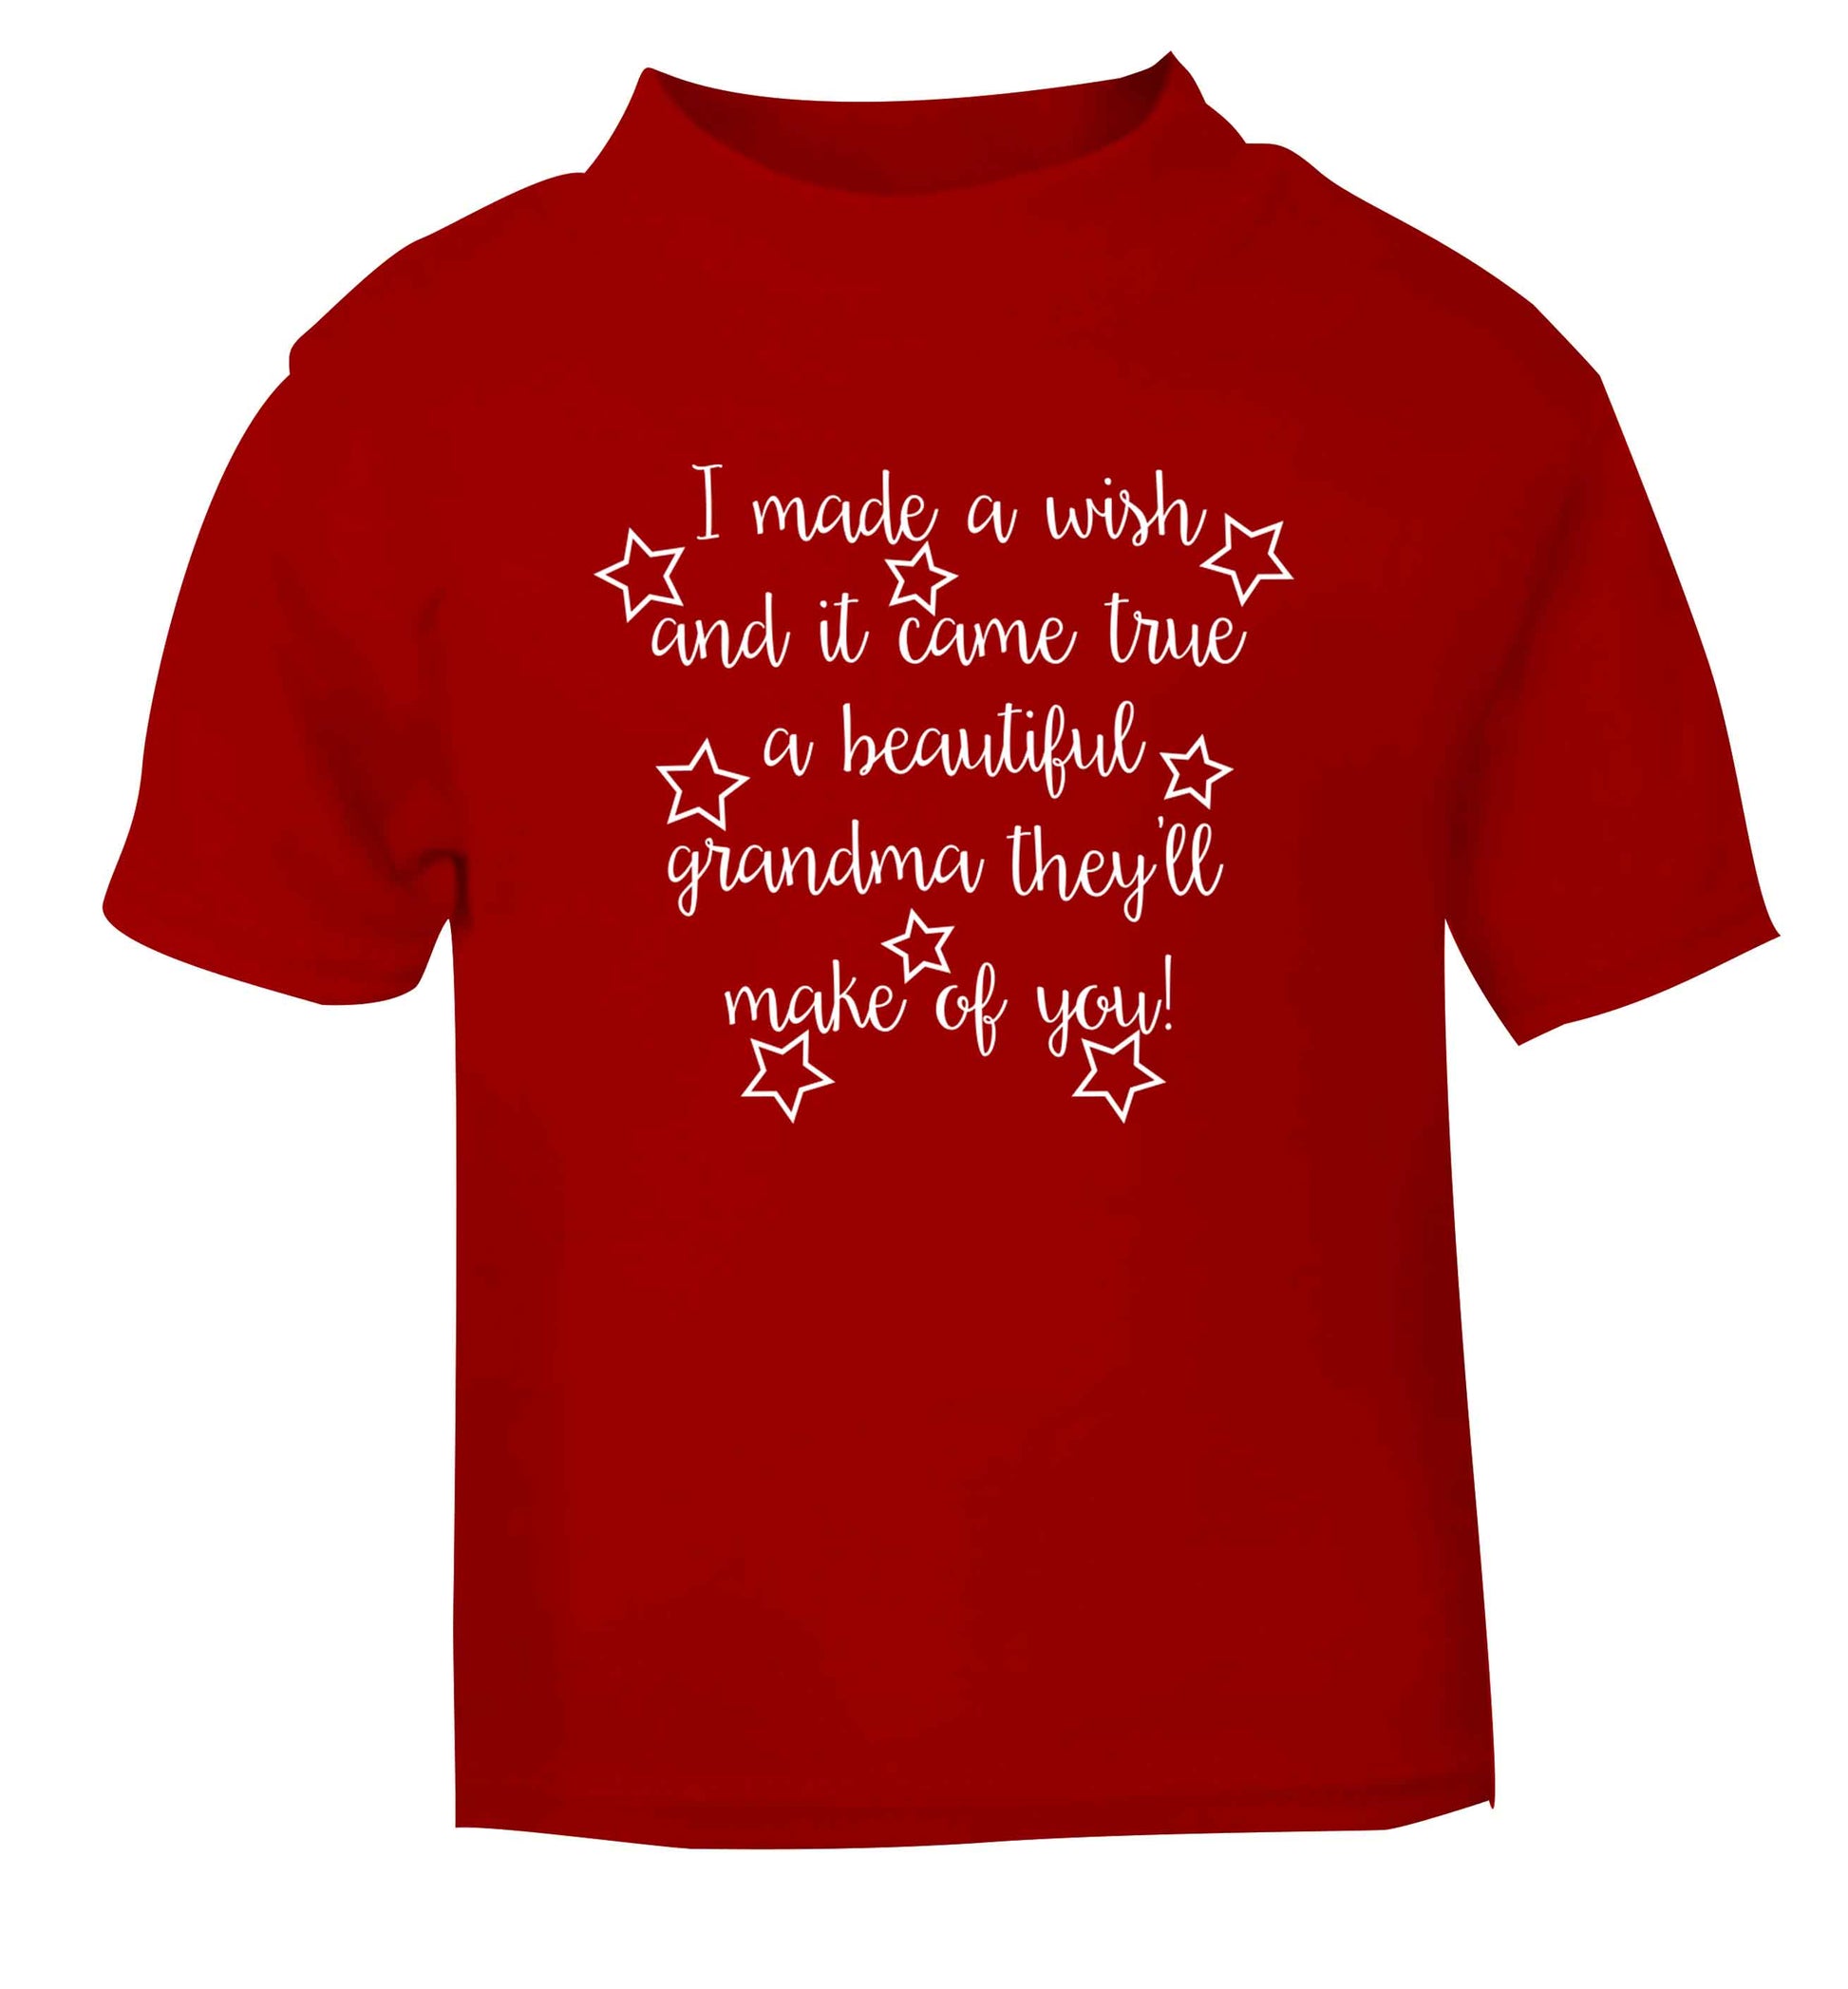 I made a wish and it came true a beautiful grandma they'll make of you! red Baby Toddler Tshirt 2 Years